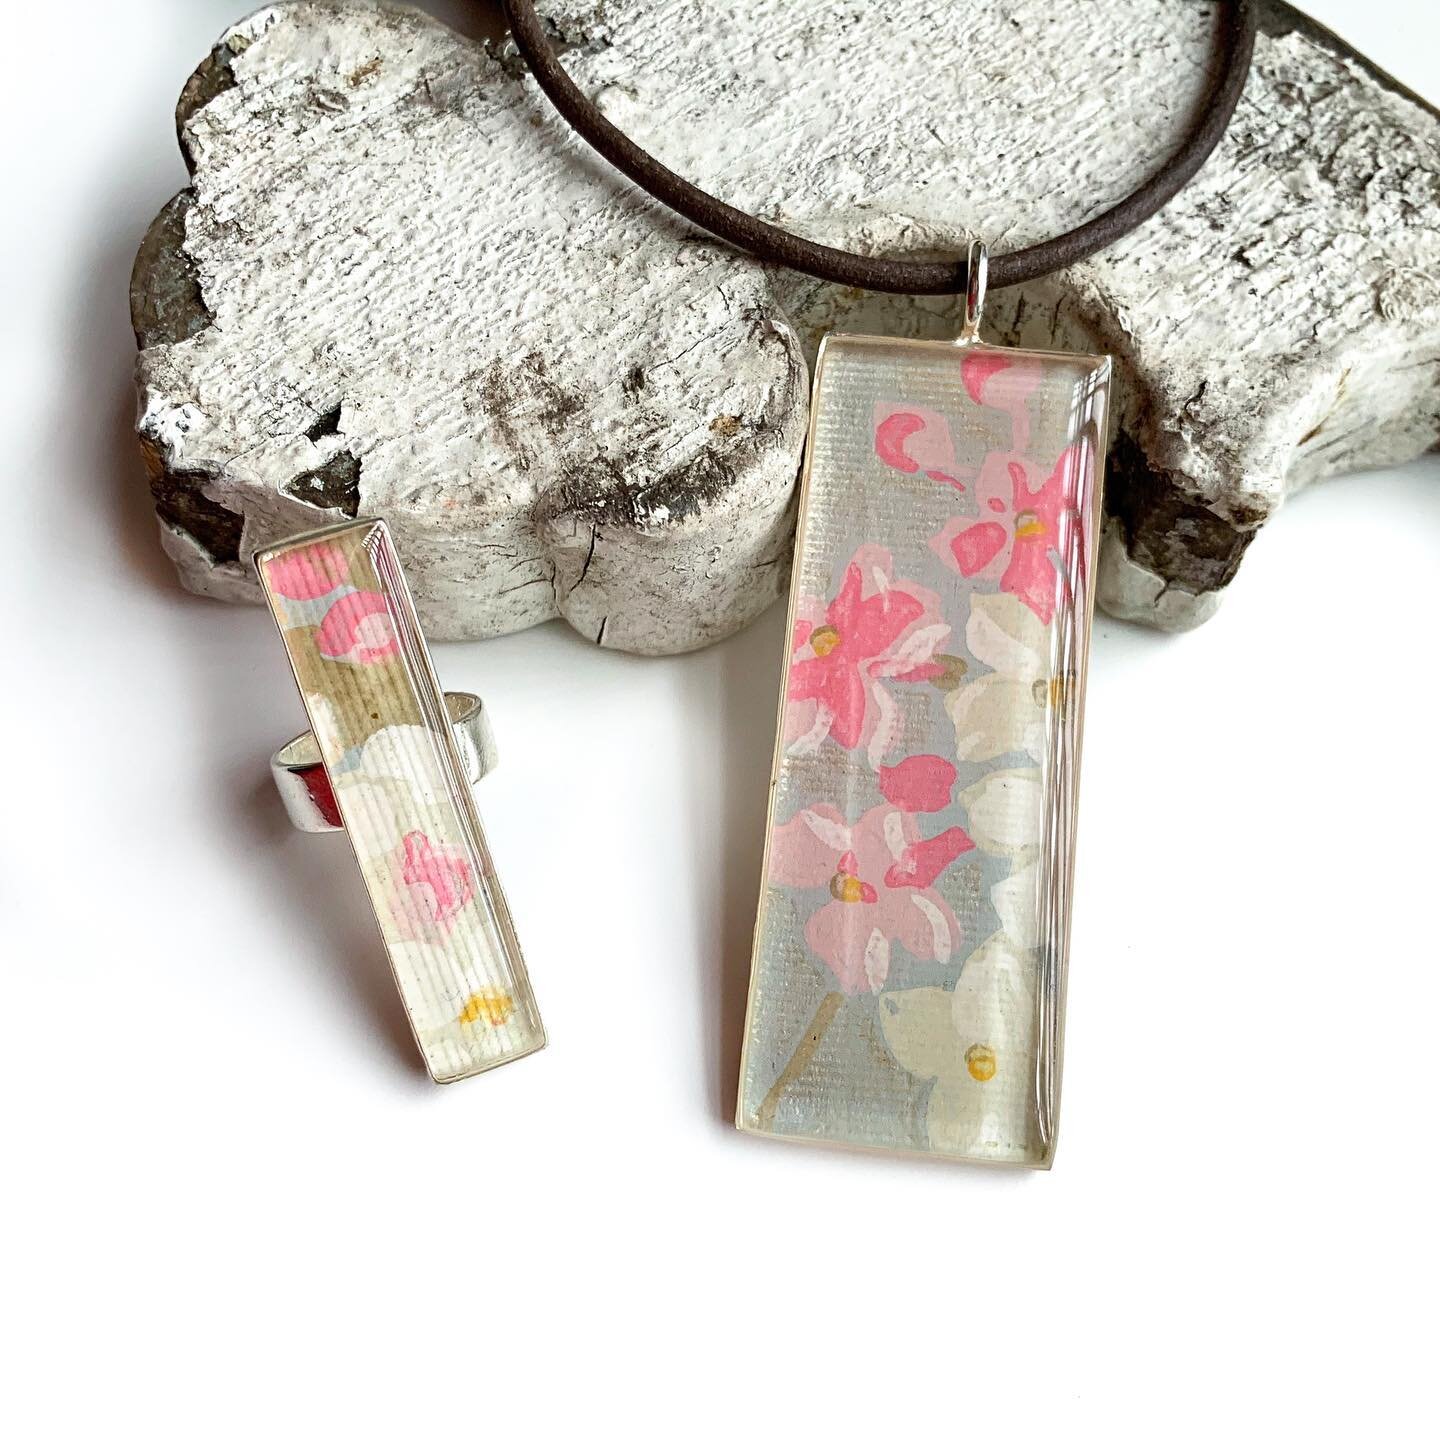 Nothing shines like handmade jewelry! Treat yourself to some Summer sparkle from one of our talented member shops in The Etsy Market on Saturday July 17th. Whether you&rsquo;re looking for the panache of precious metals, the timeless elegance of enam